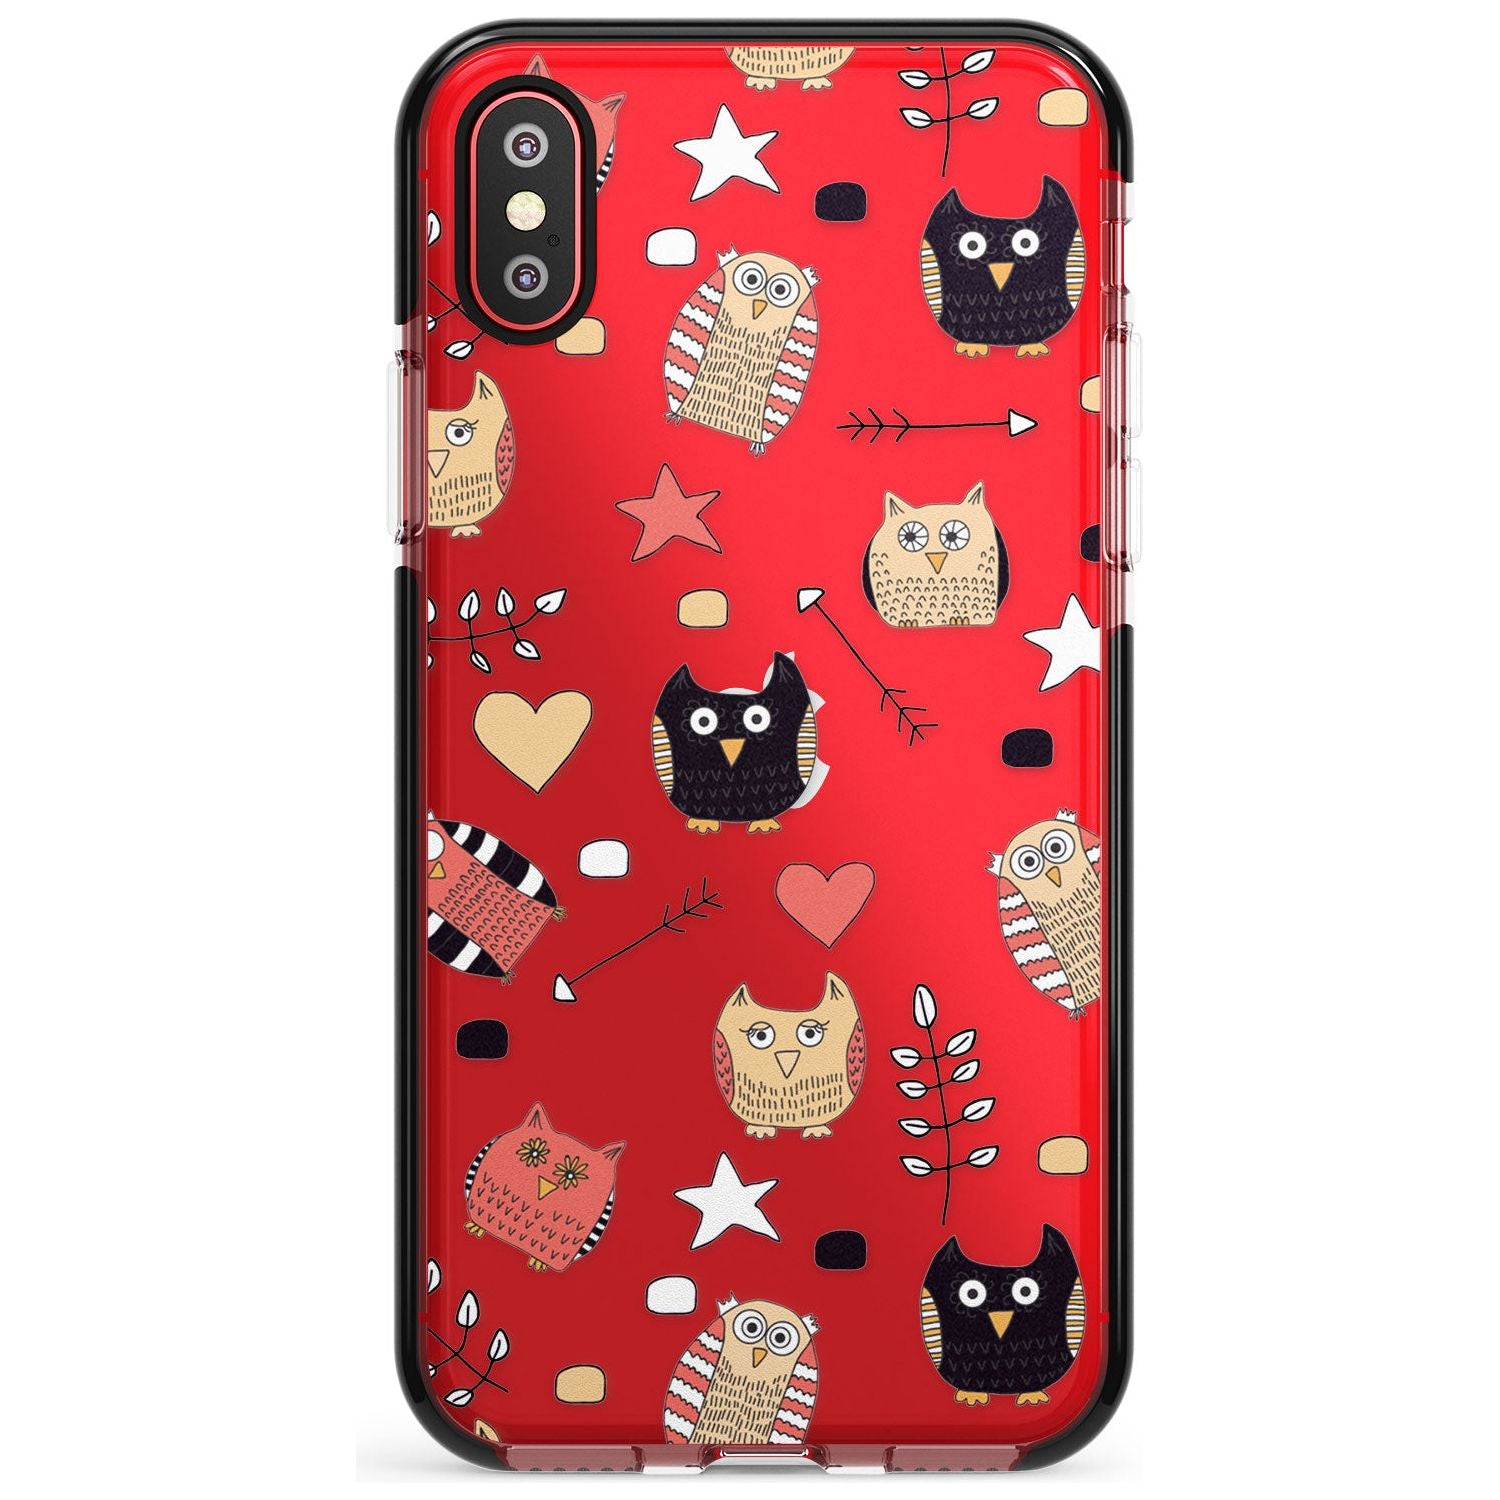 Cute Owl Pattern Black Impact Phone Case for iPhone X XS Max XR